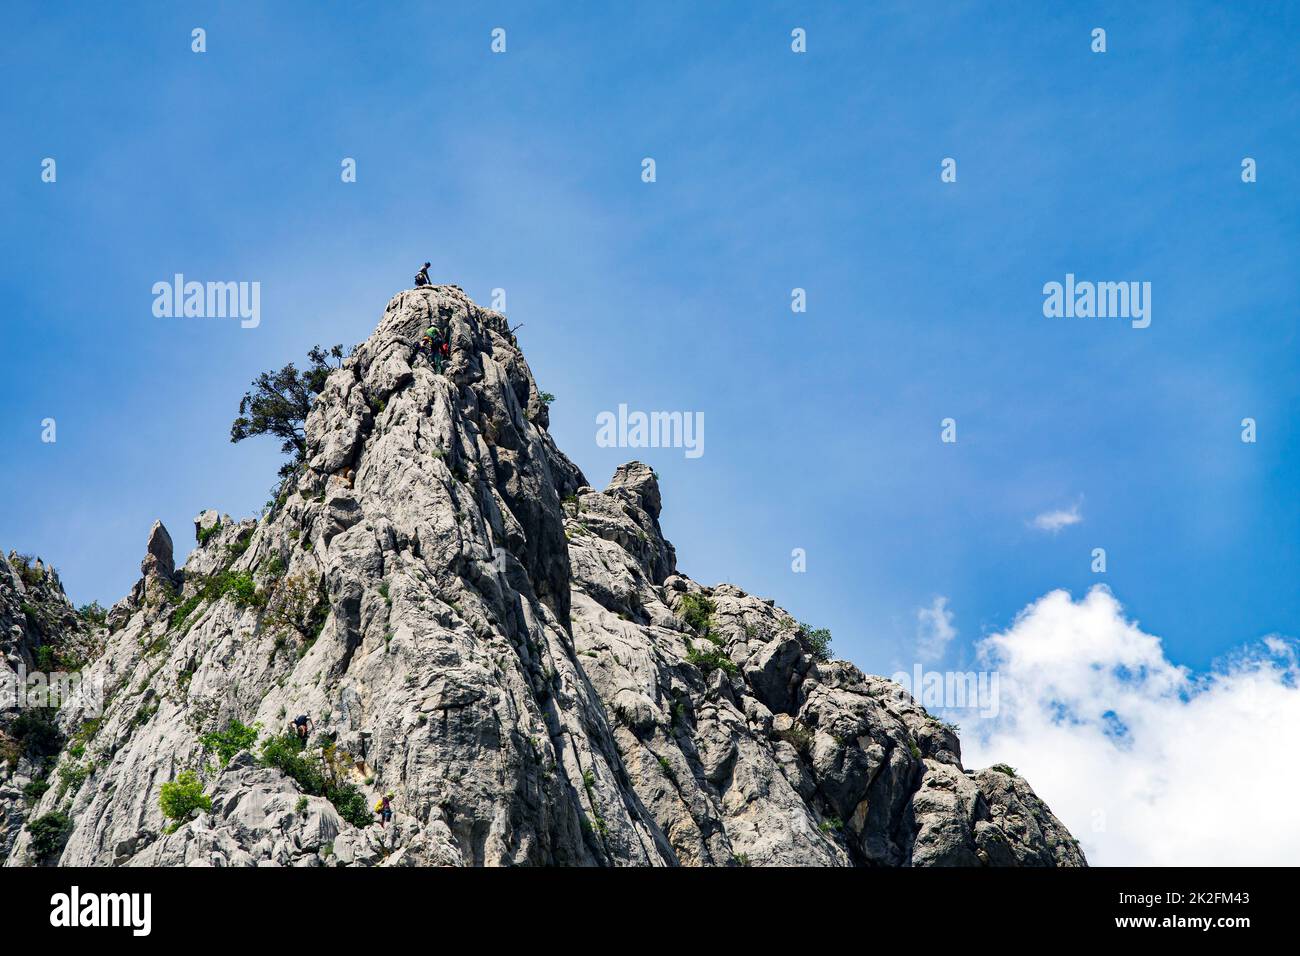 Paklenica, Croatia, EU - June 25, 2022: Distant view of mountain climbers in national park Paklenica. Stock Photo